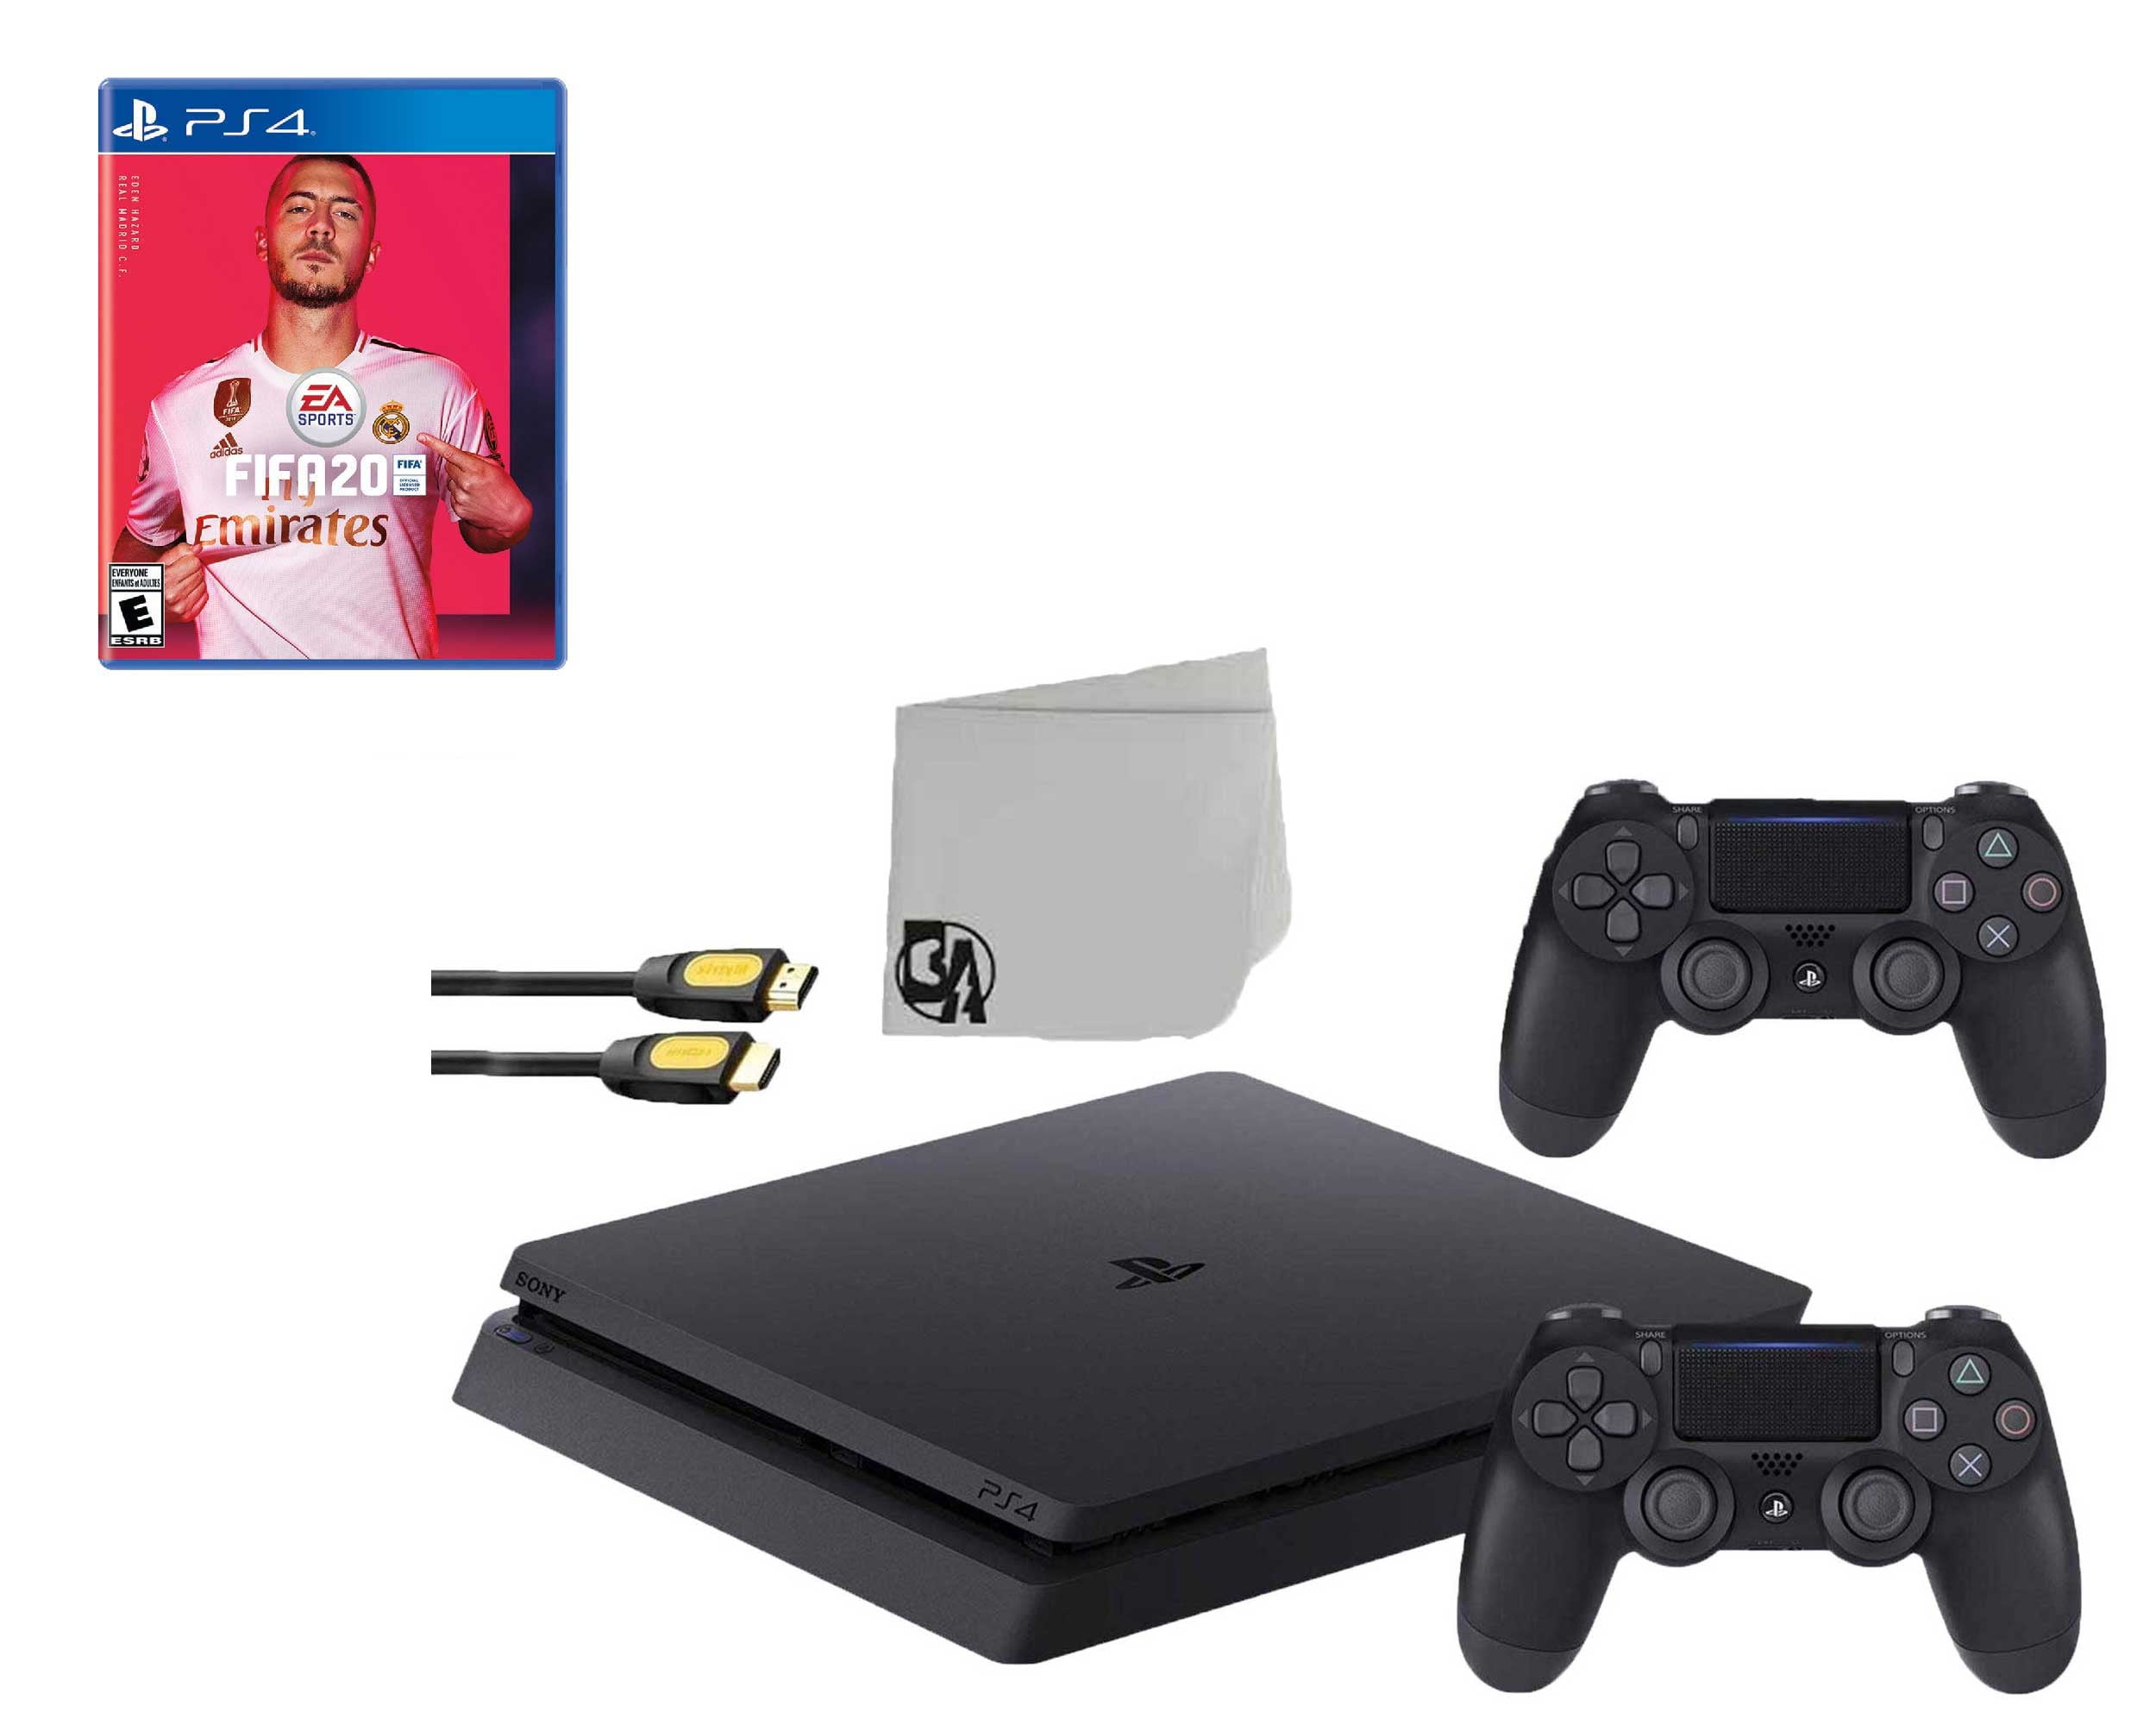 Sony 2215A PlayStation 4 Slim 500GB Gaming Console Black 2 Controller  Included with FIFA-20 Game BOLT AXTION Bundle Used